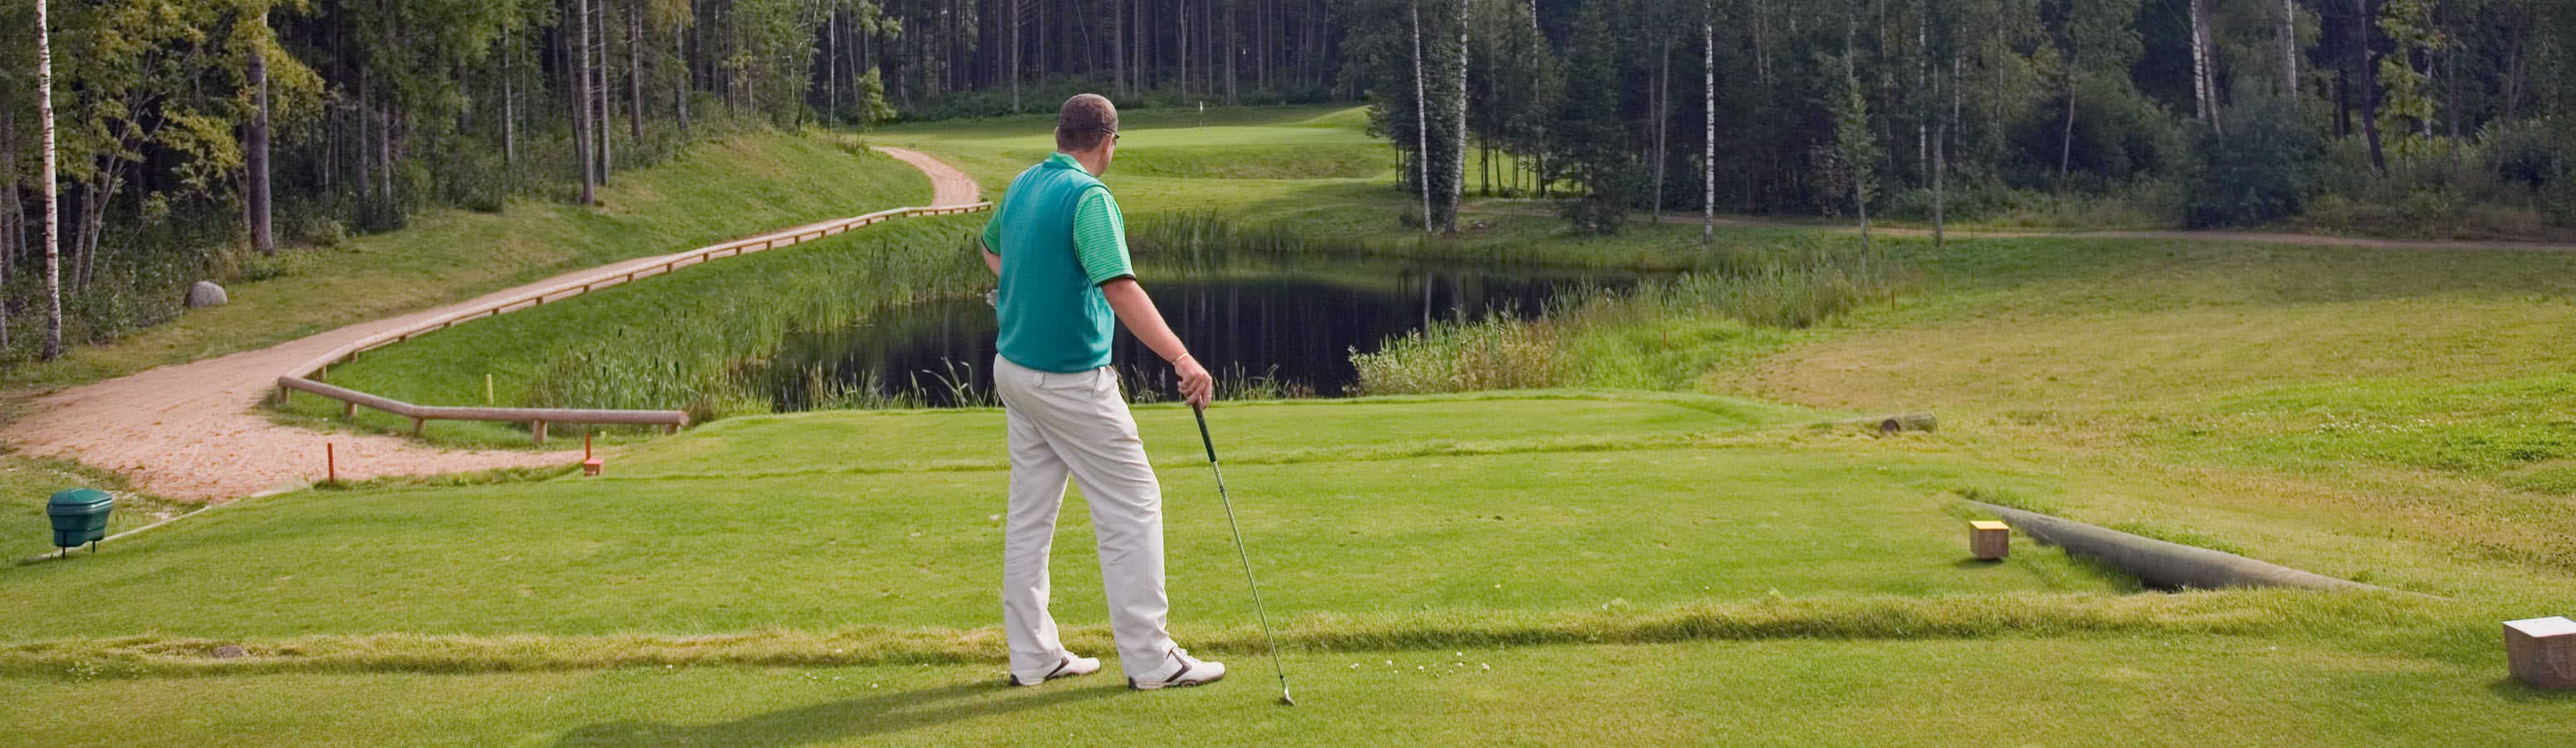 Golf for the most beautiful course in Estonia